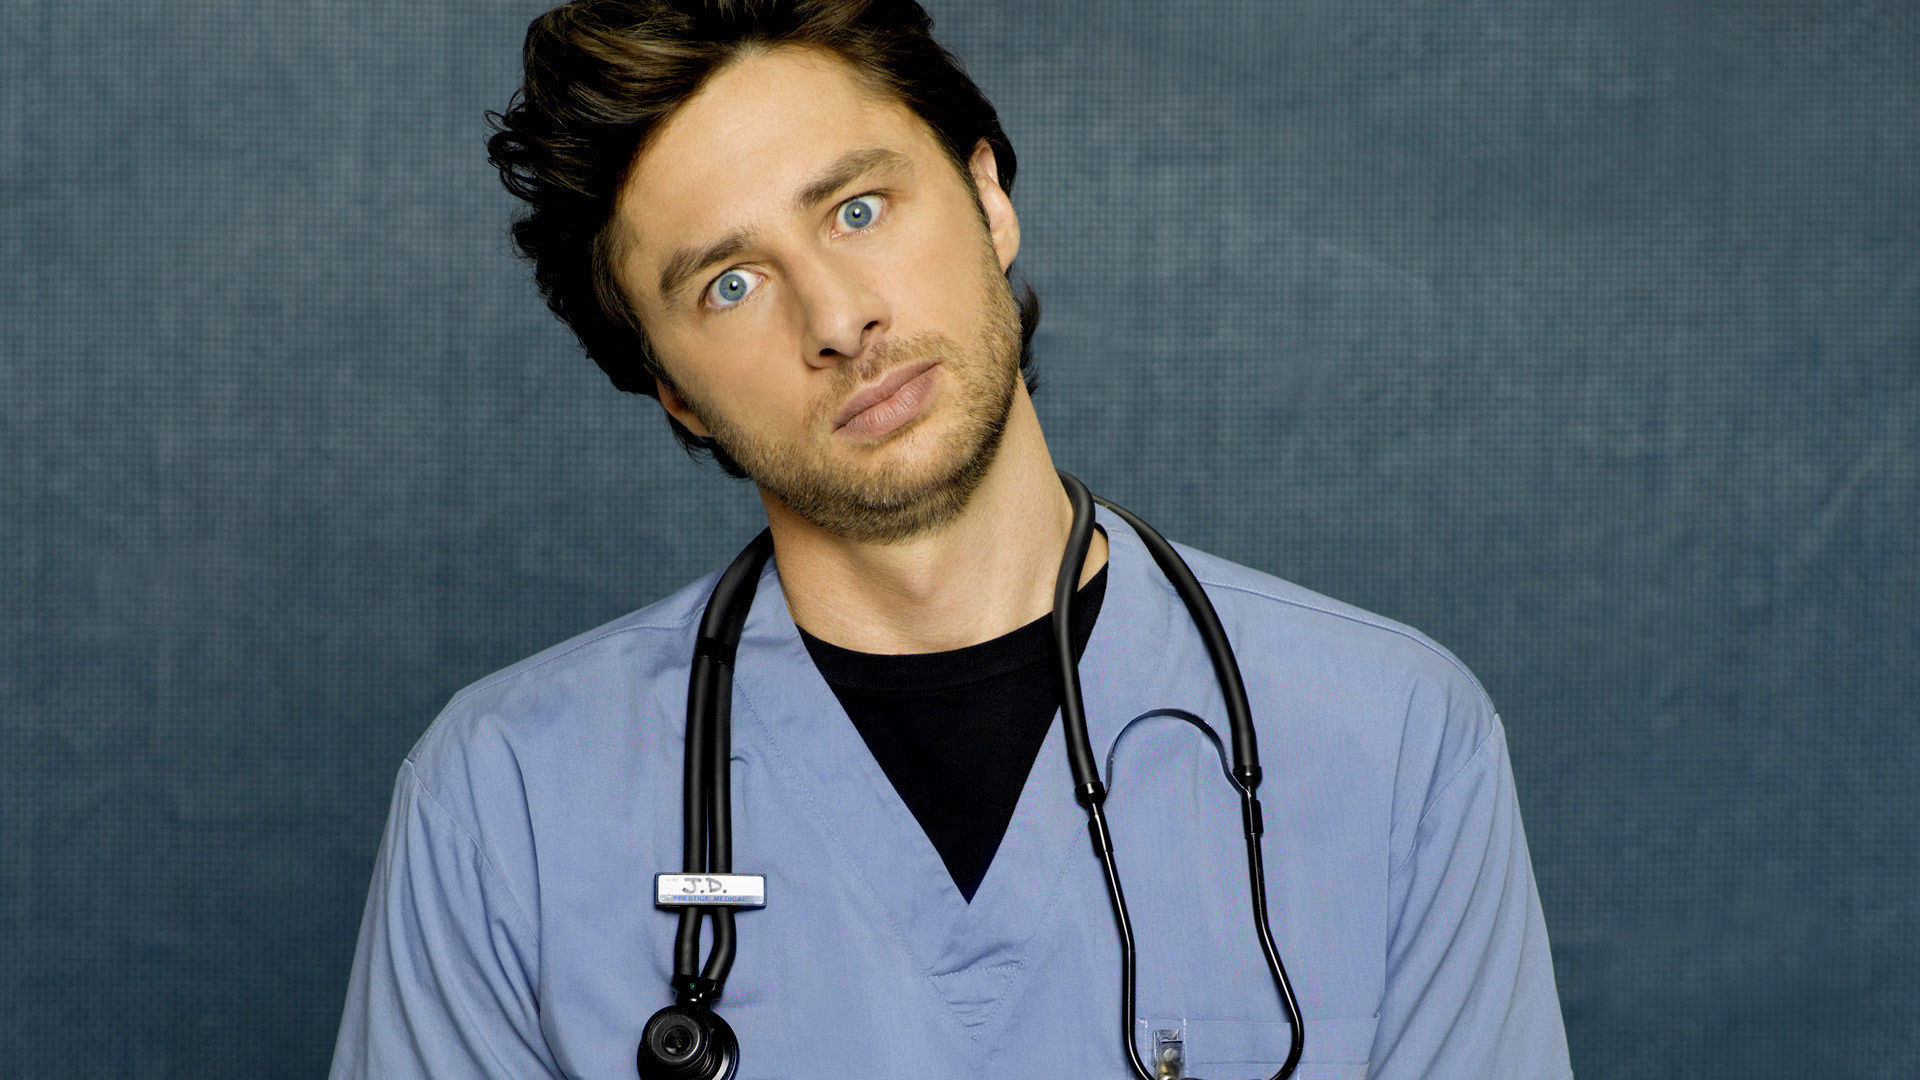 Zach Braff: Nominee for Primetime Emmy Award for Outstanding Comedy Series in 2005 and 2006 for role in Scrubs. 1920x1080 Full HD Background.